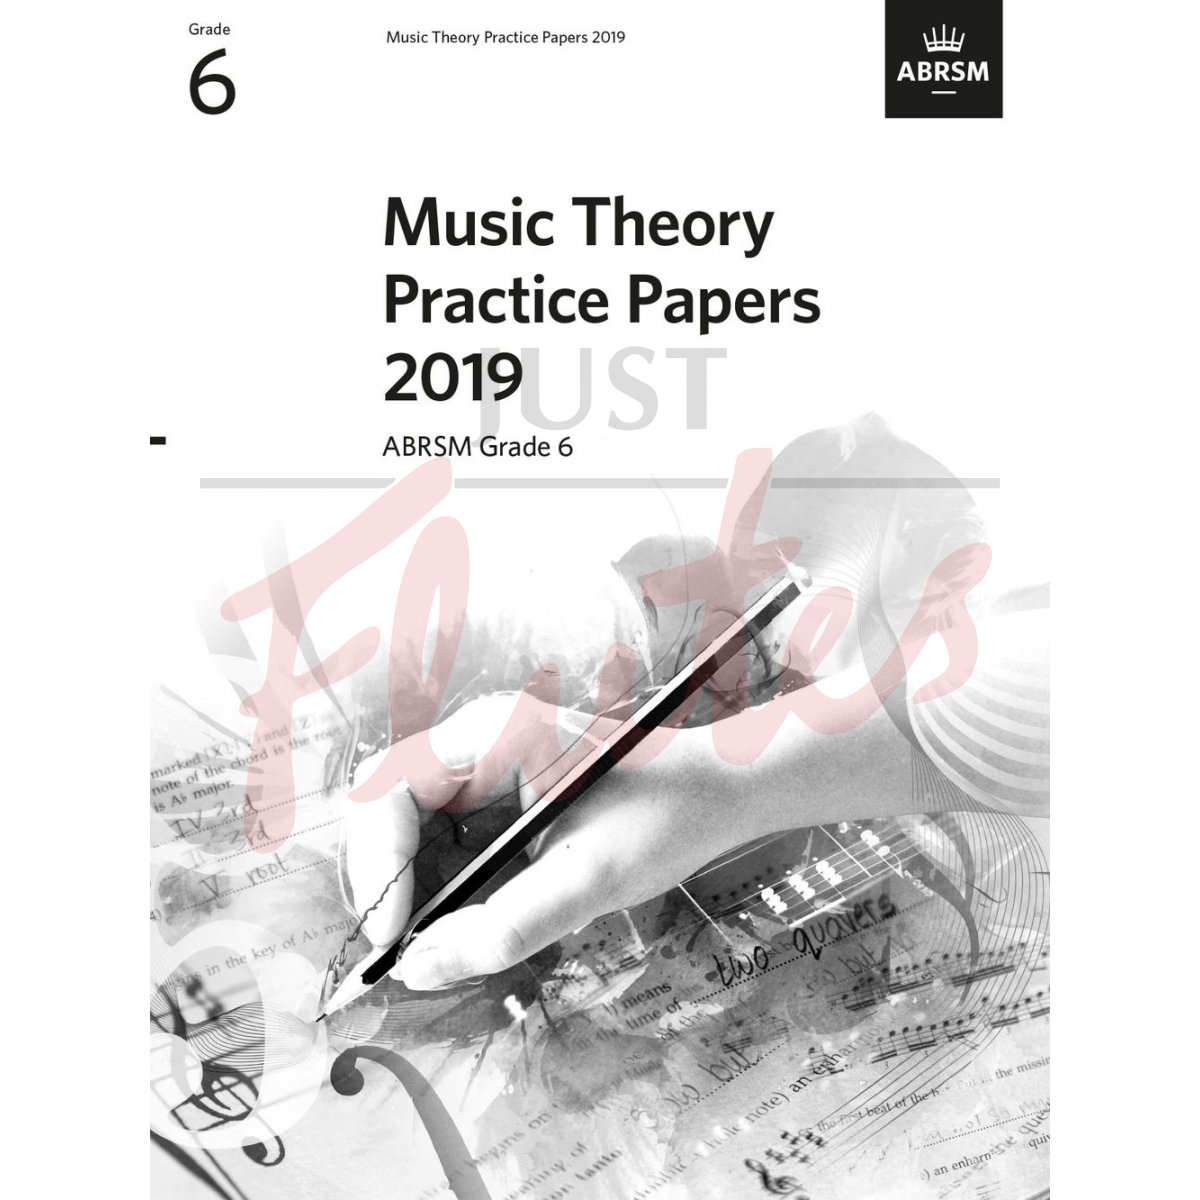 Music Theory Practice Papers 2019 Grade 6